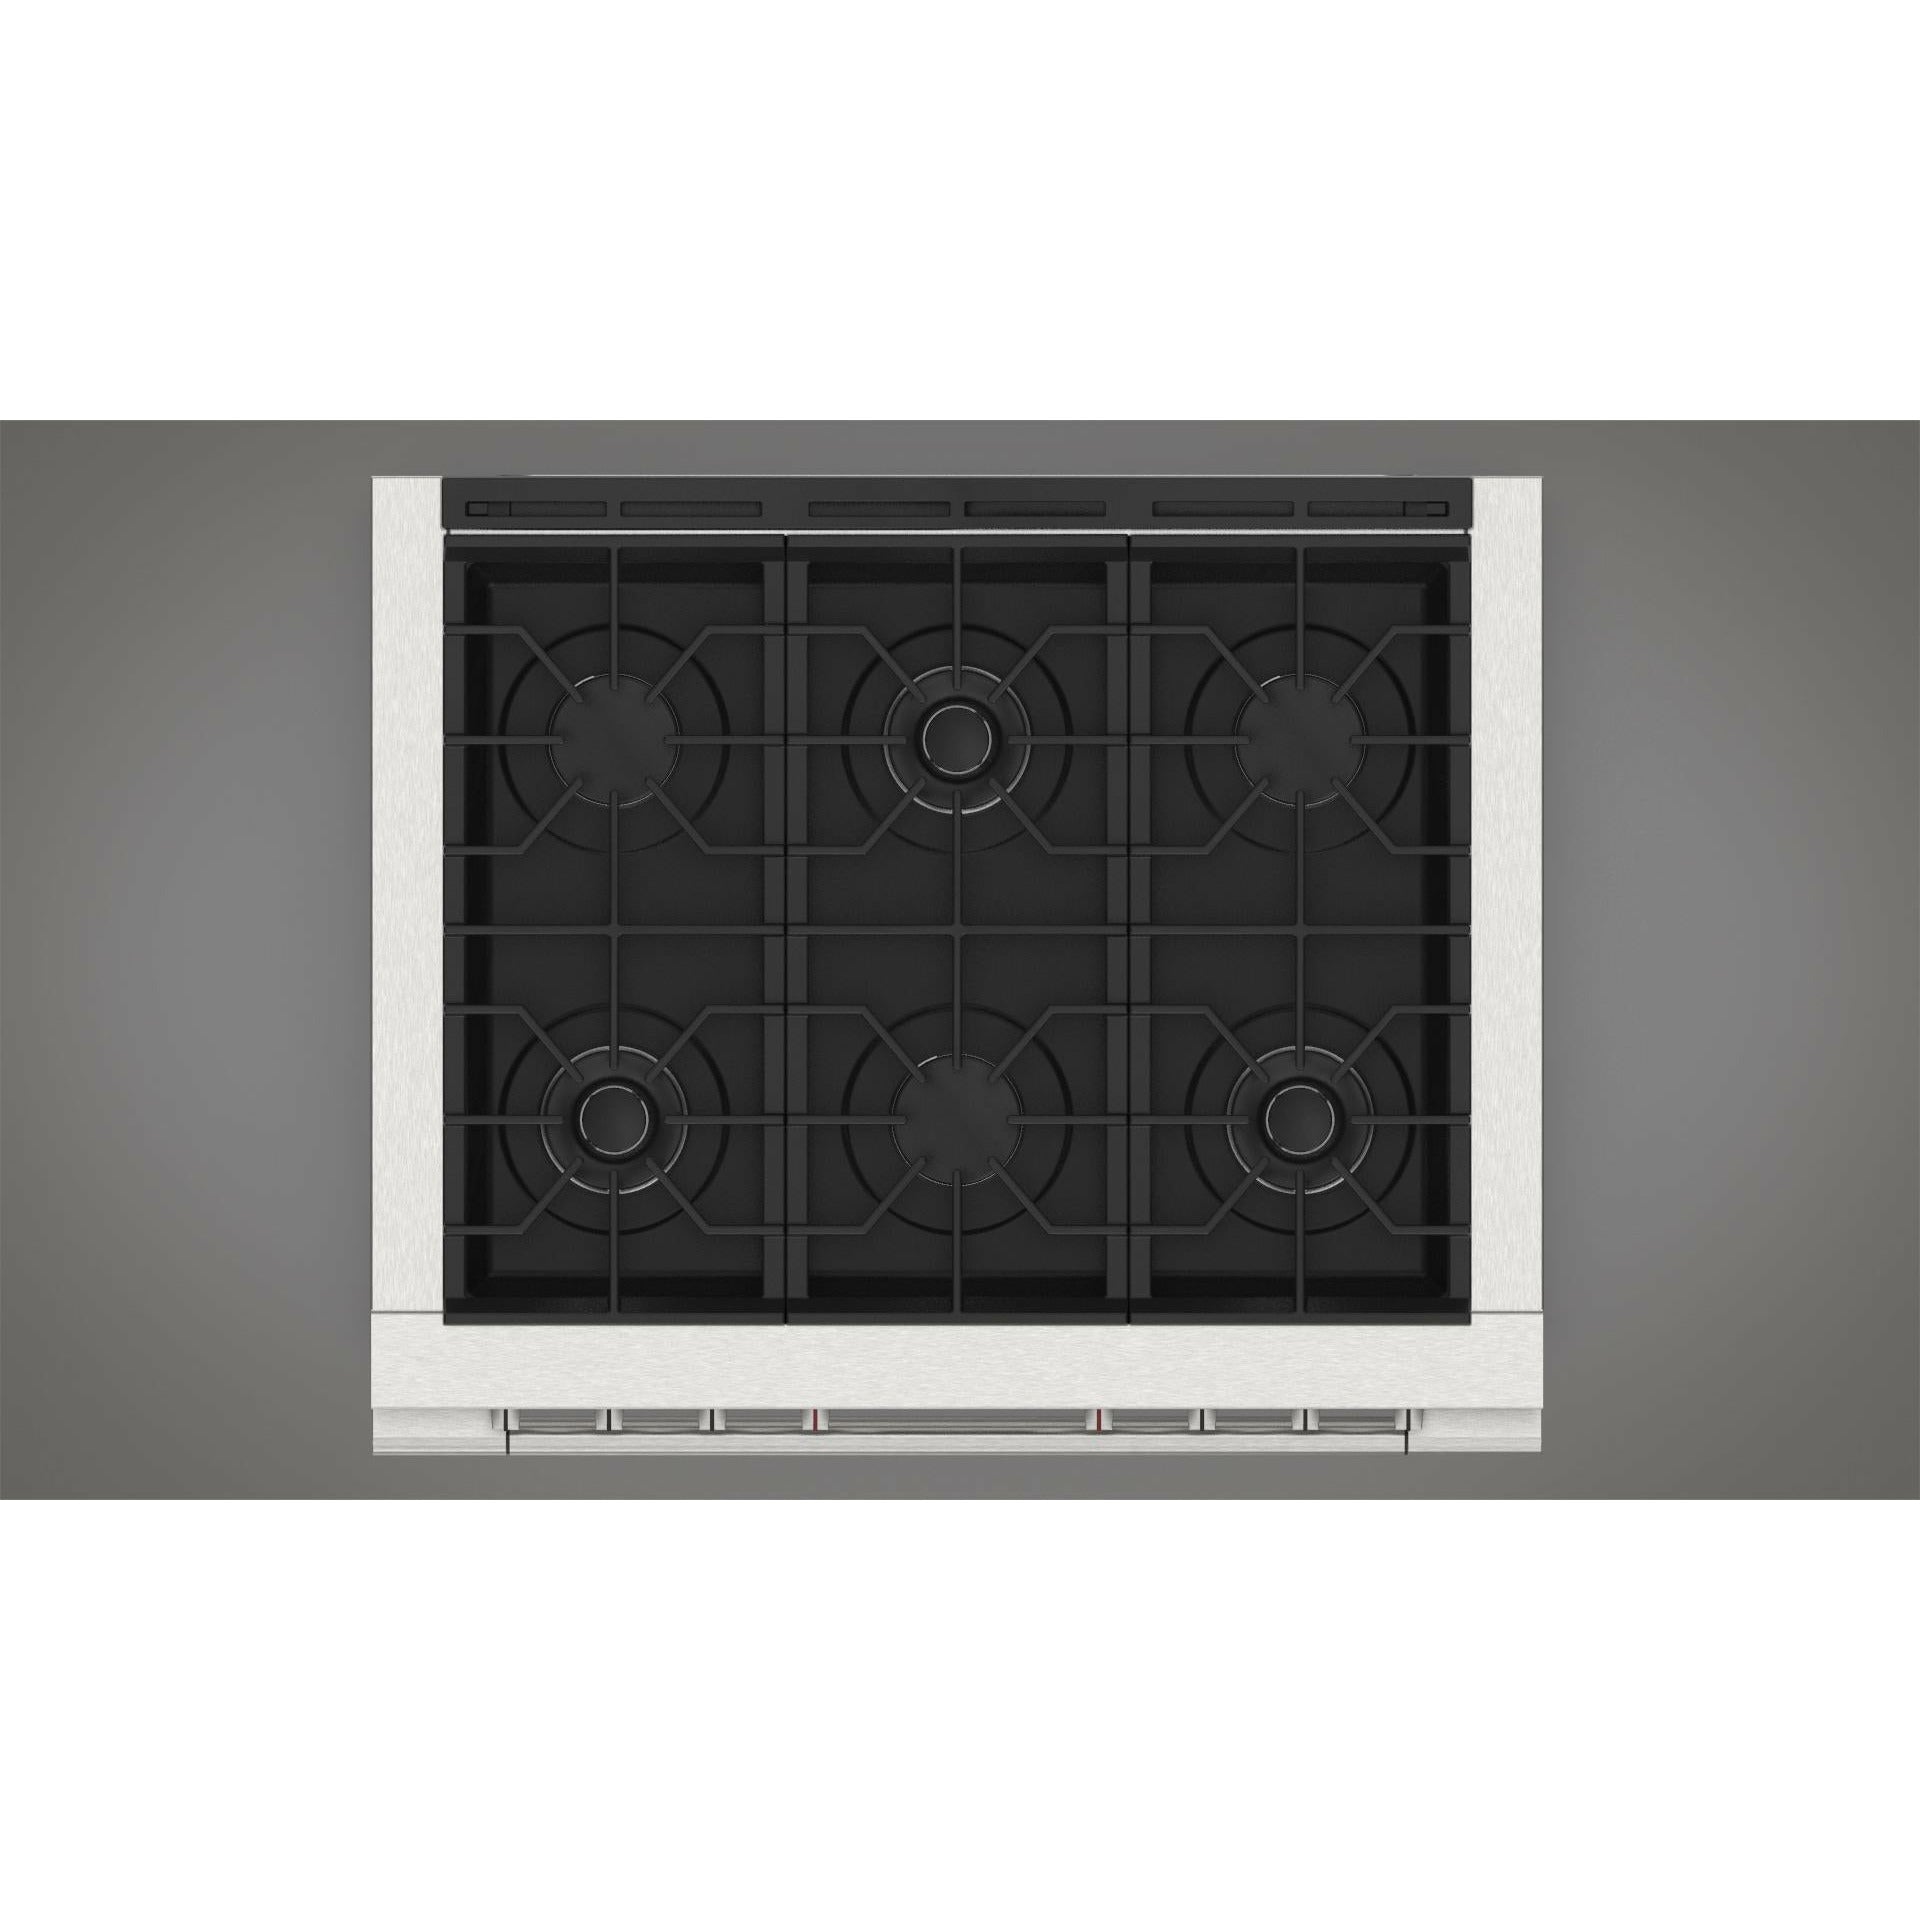 Fulgor Milano 36" Freestanding All Gas Range with 3 Duel Flame Burners, Stainless Steel - F4PGR366S2